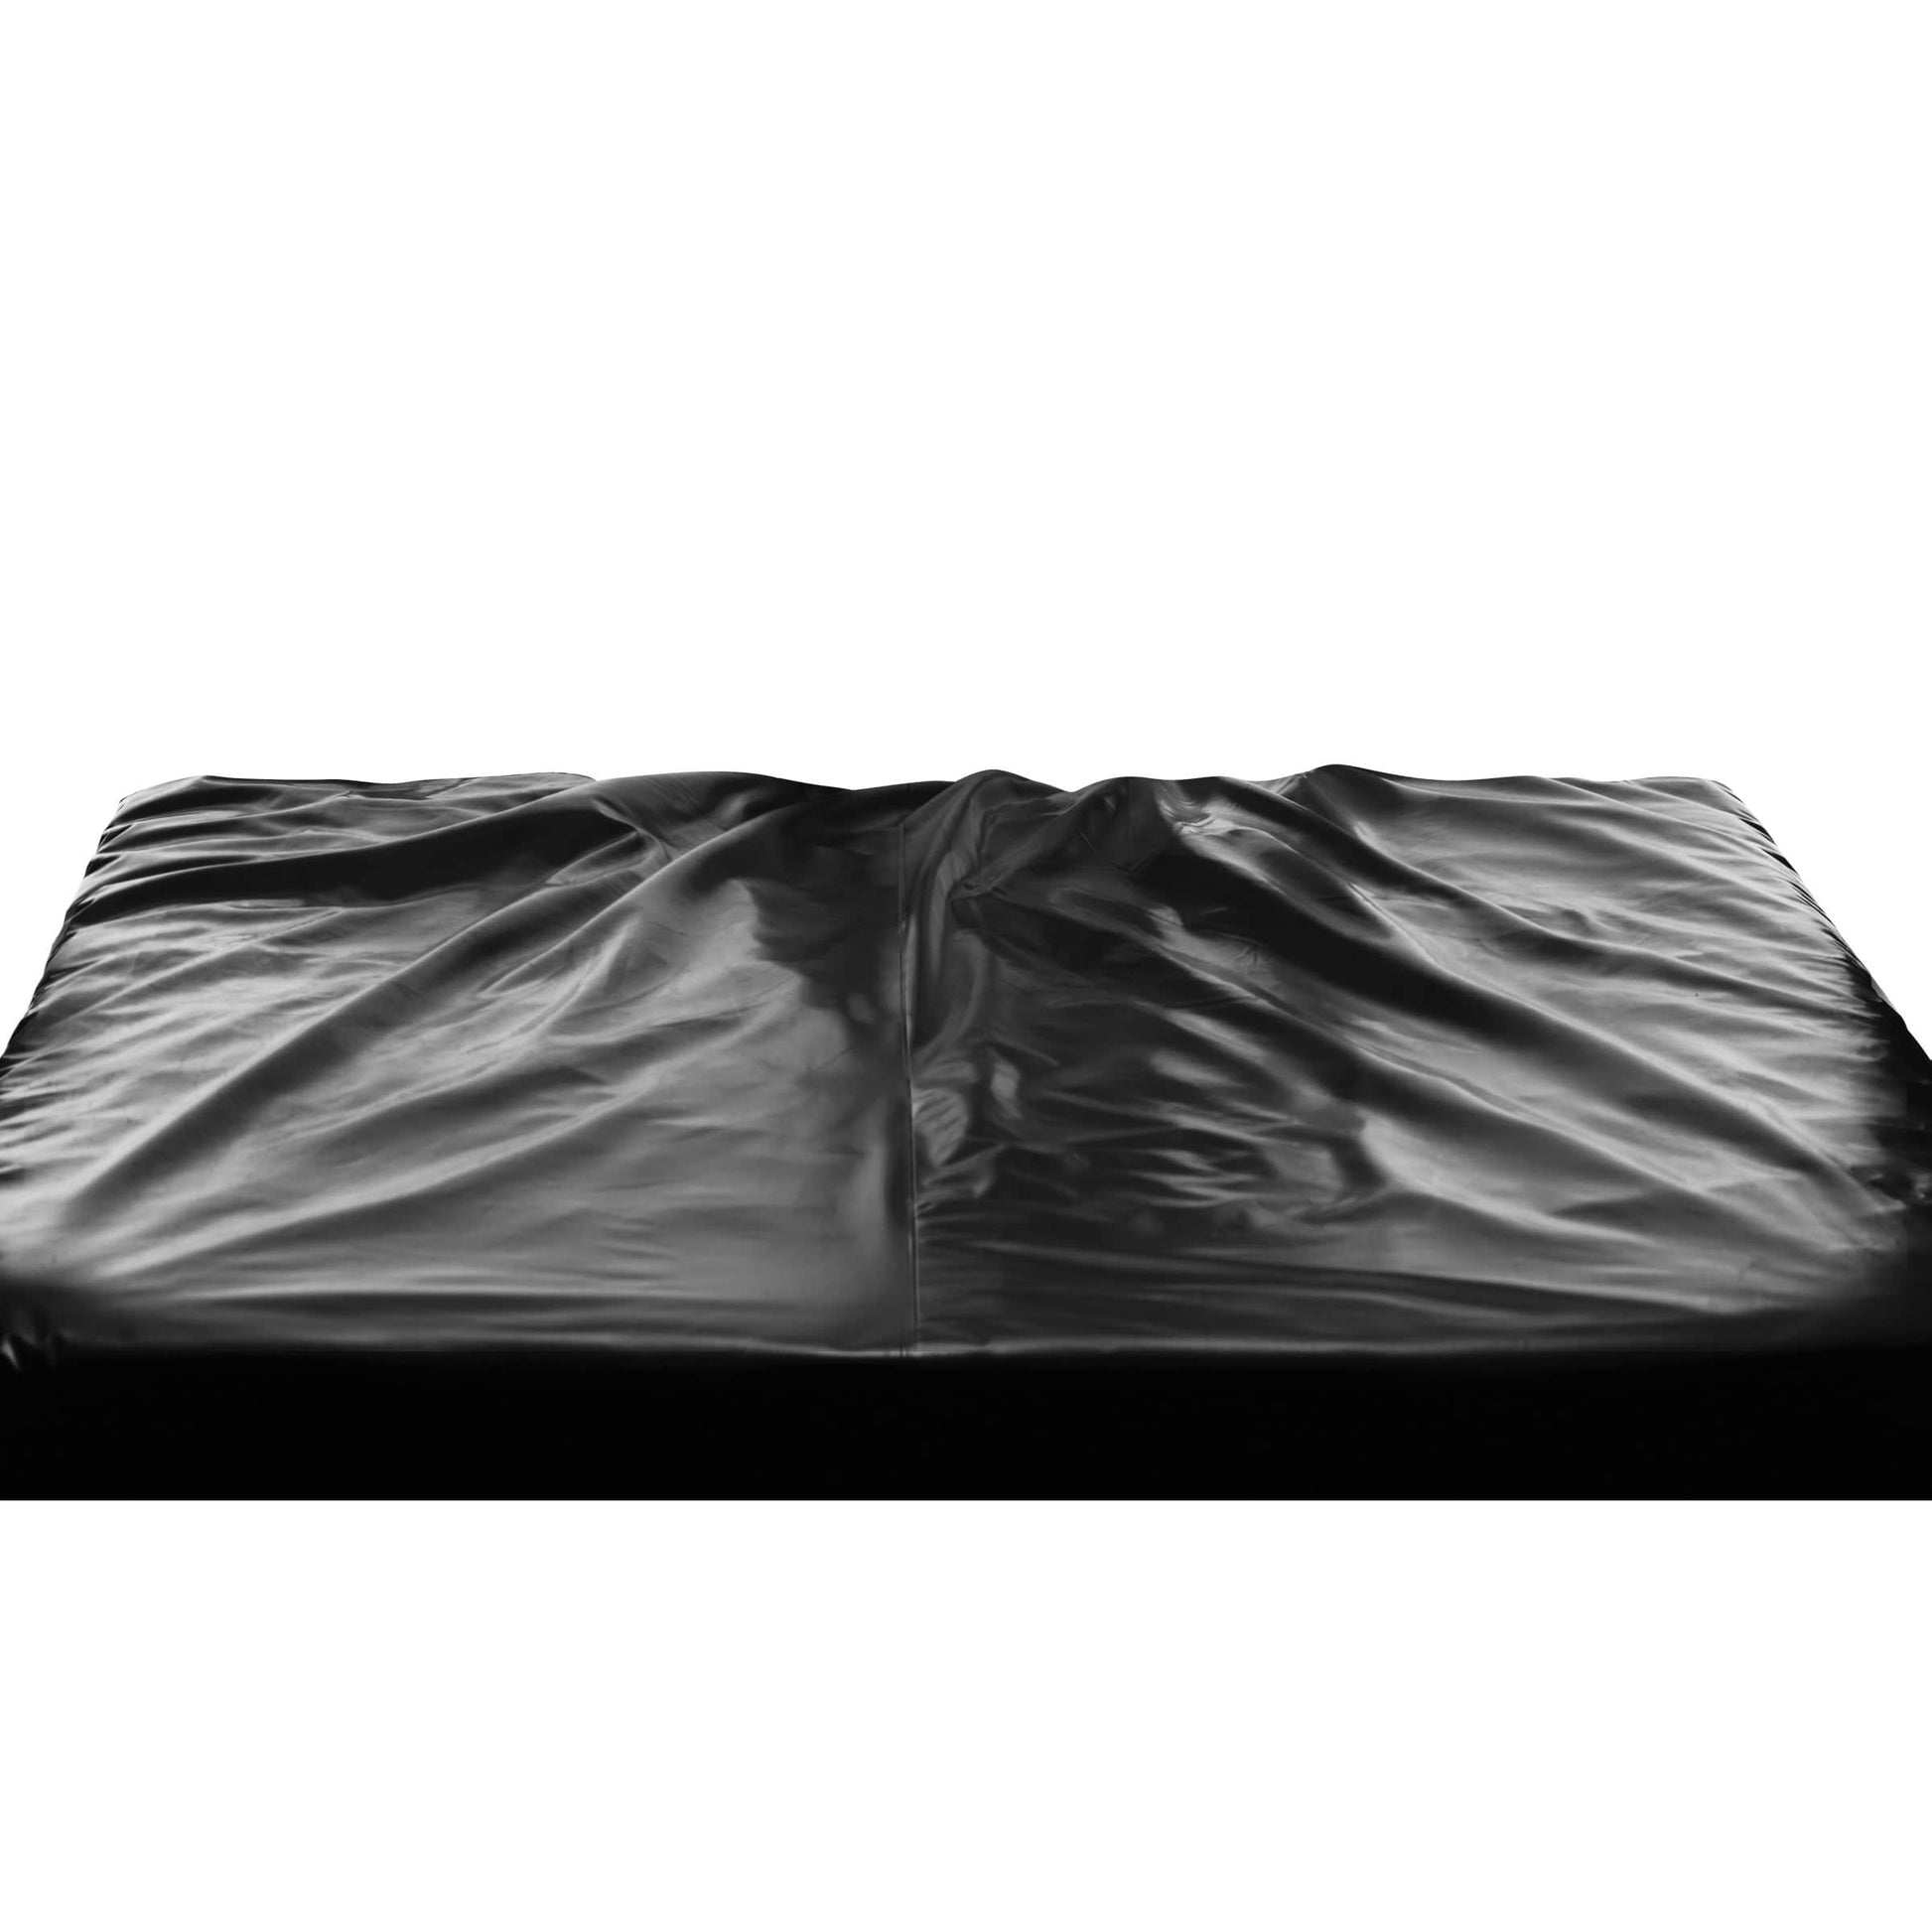 Master Series Waterproof Sheet King Size Waterproof Fitted Sex Sheet at the Haus of Shag